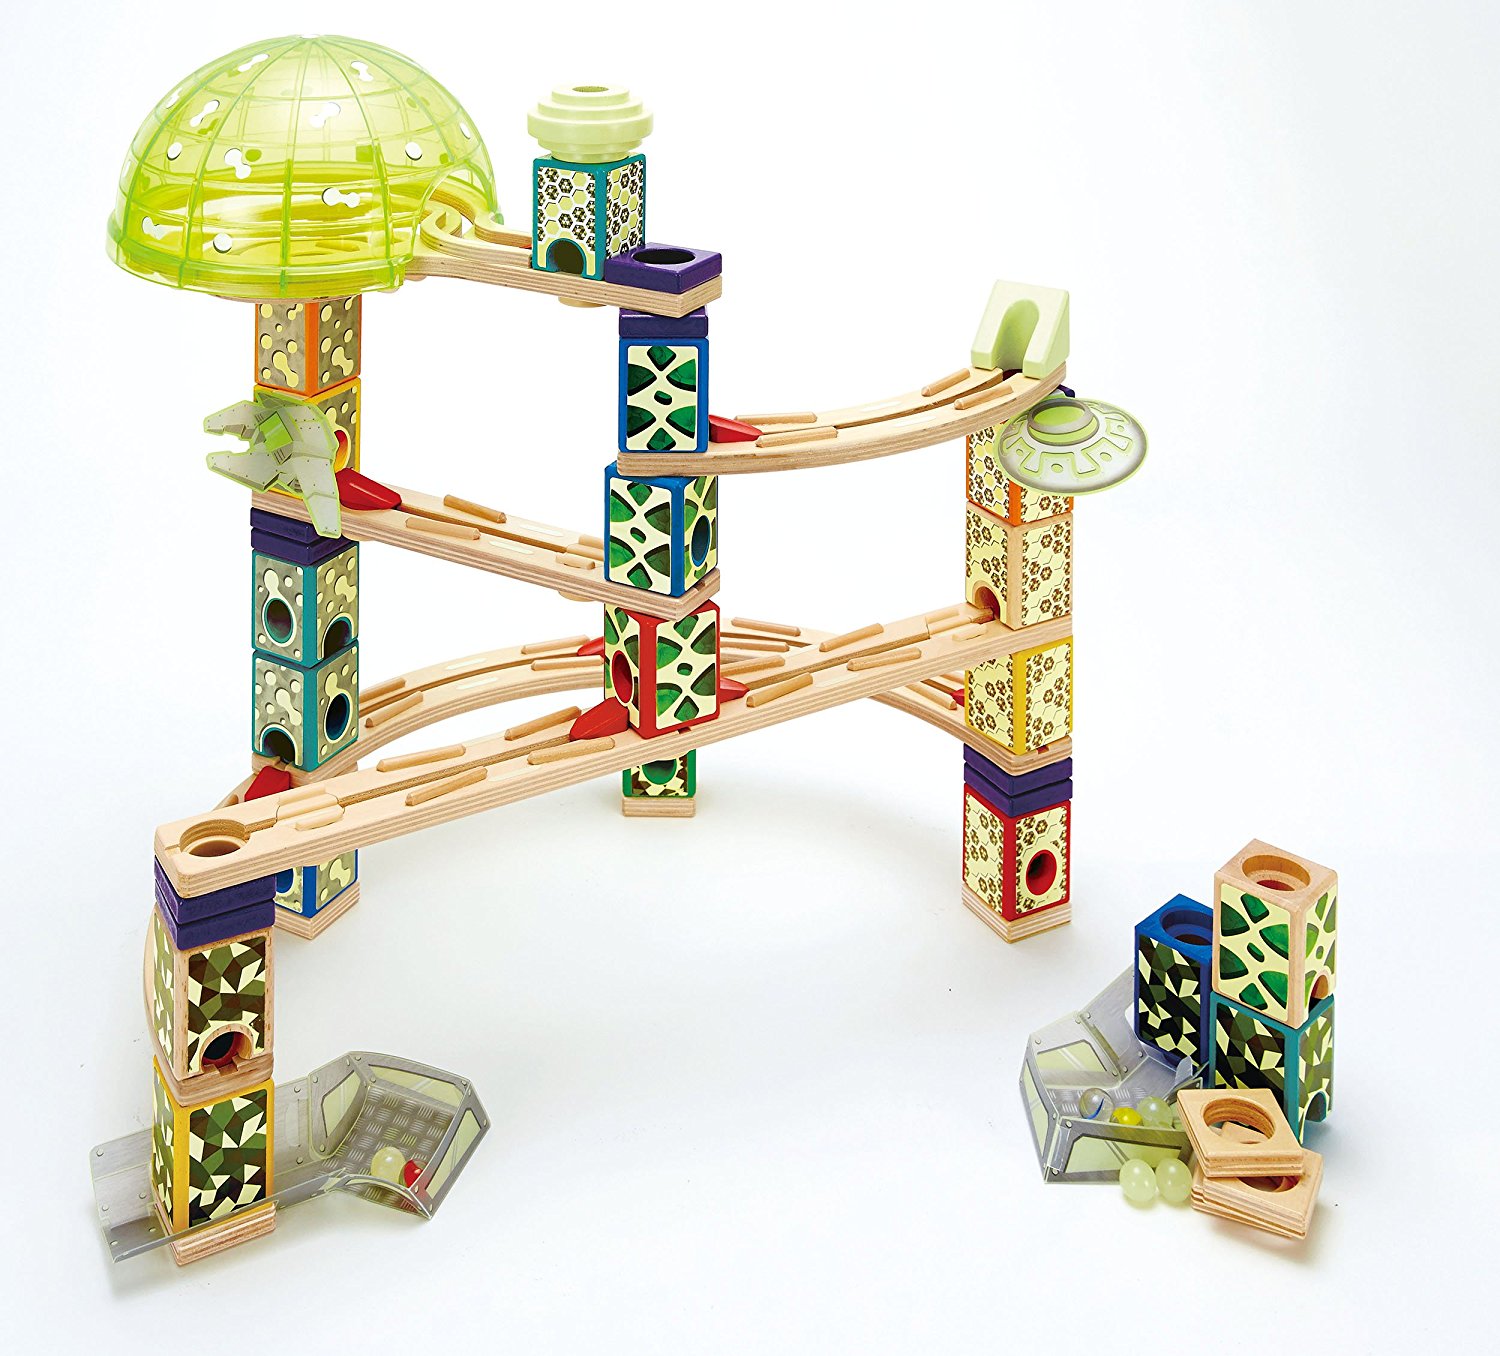 Space City Wooden Glow in the Dark Marble Run